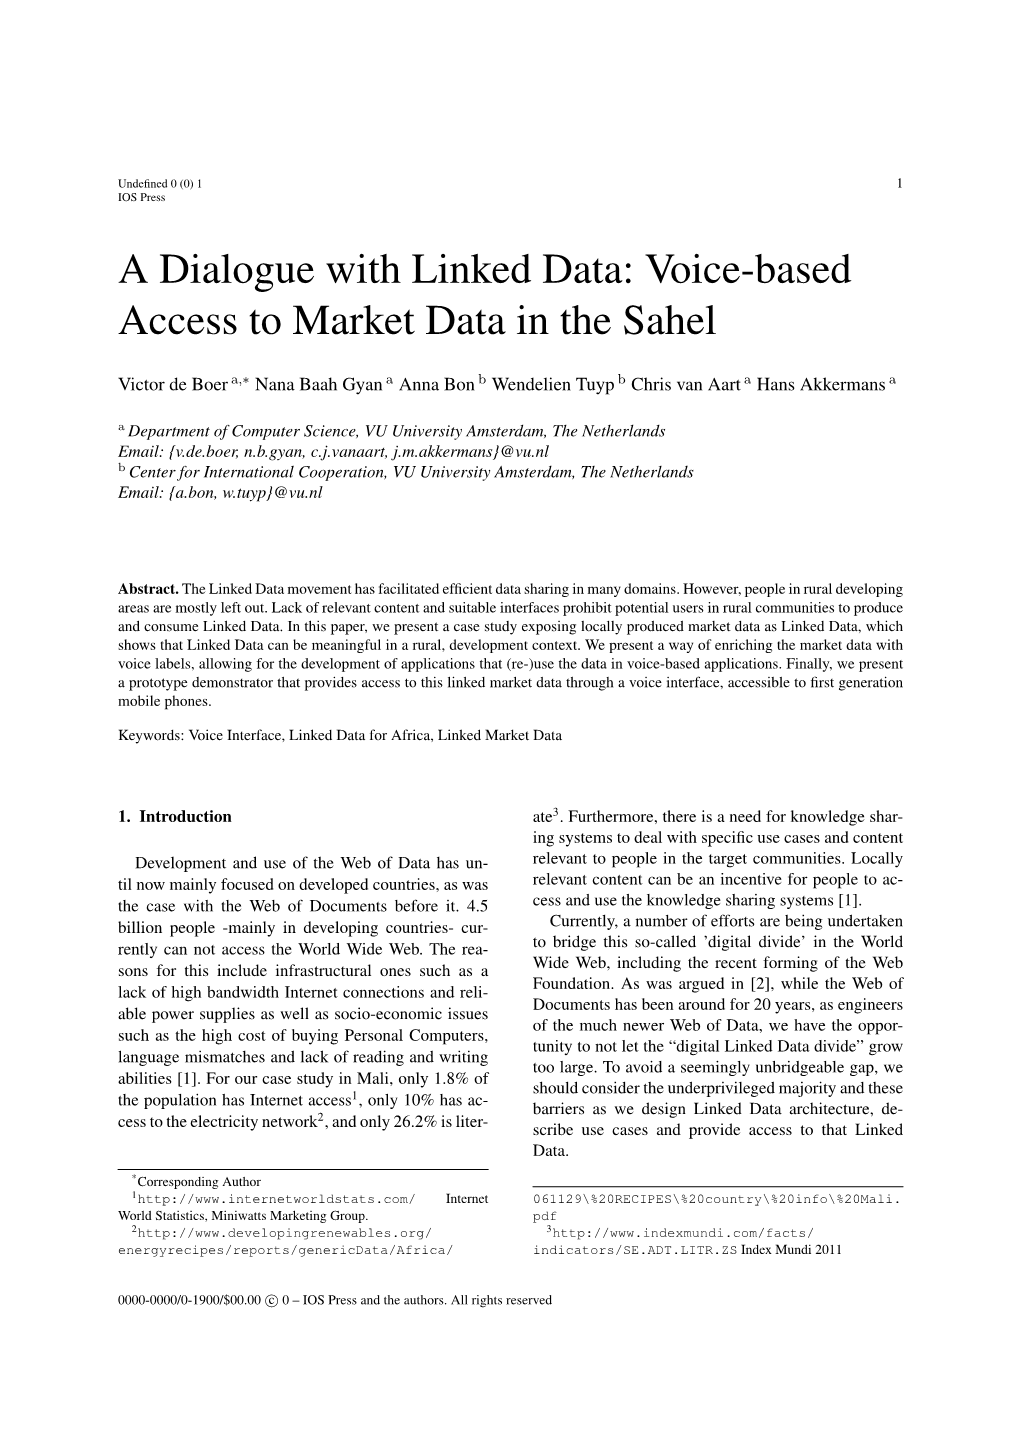 A Dialogue with Linked Data: Voice-Based Access to Market Data in the Sahel